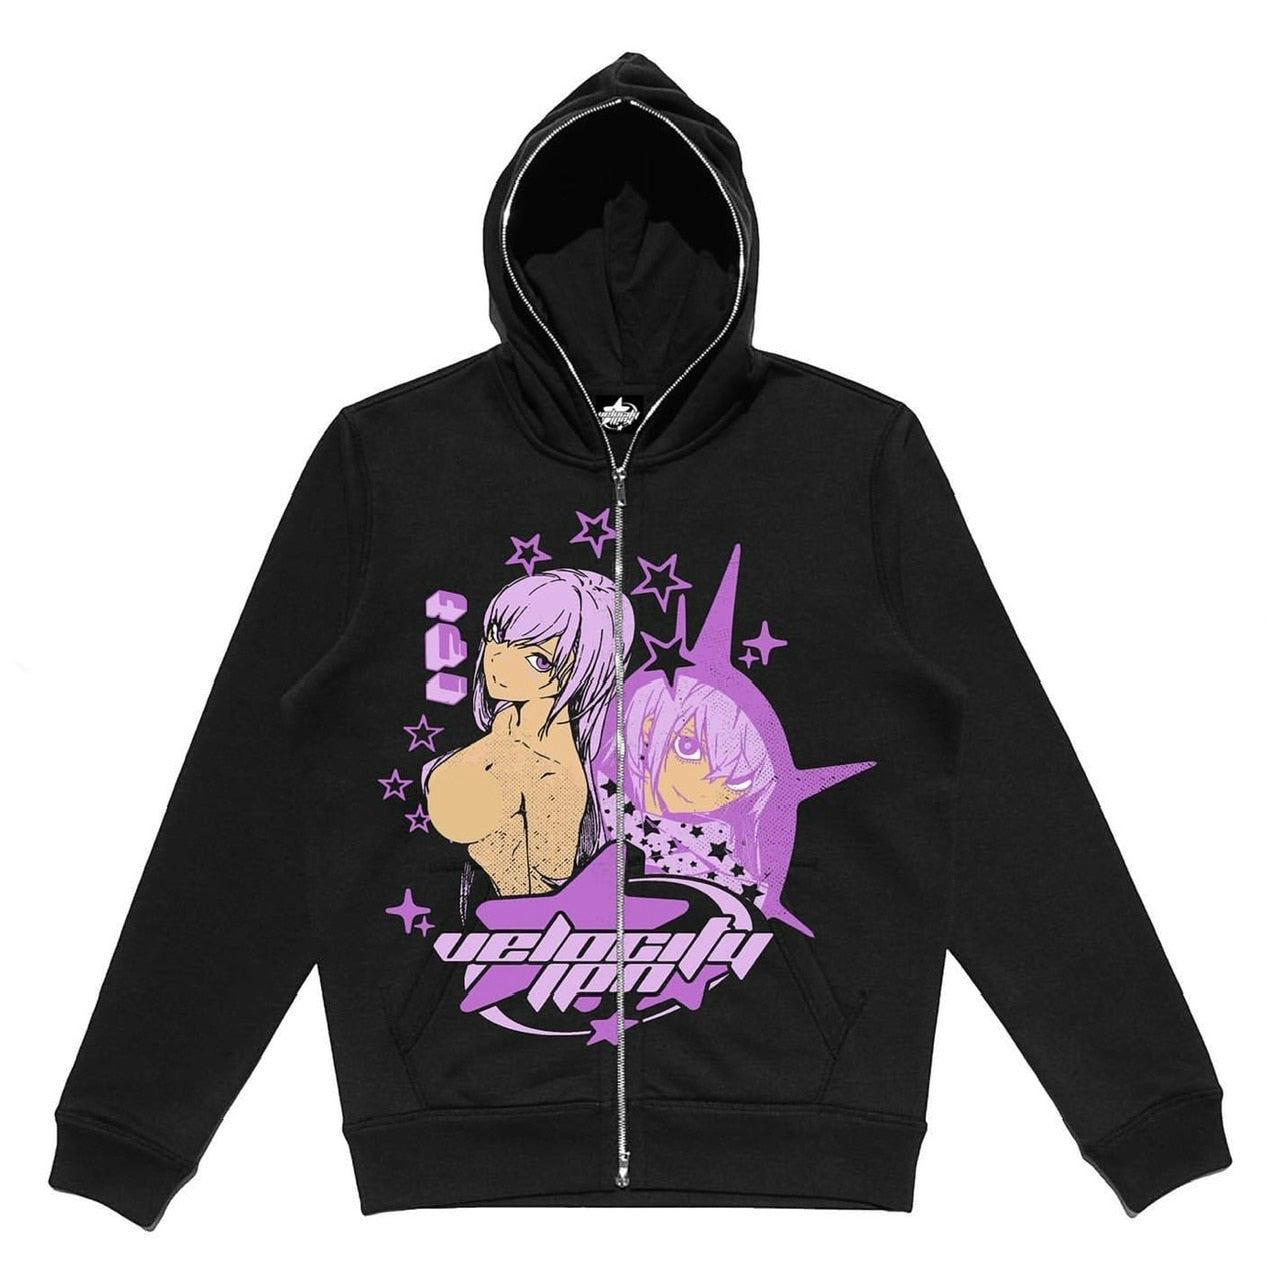 Anime - Streetwear - "VELOCITY" - Soul Eater Anime Oversized Hoodie | 5 Colors - Alpha Weebs